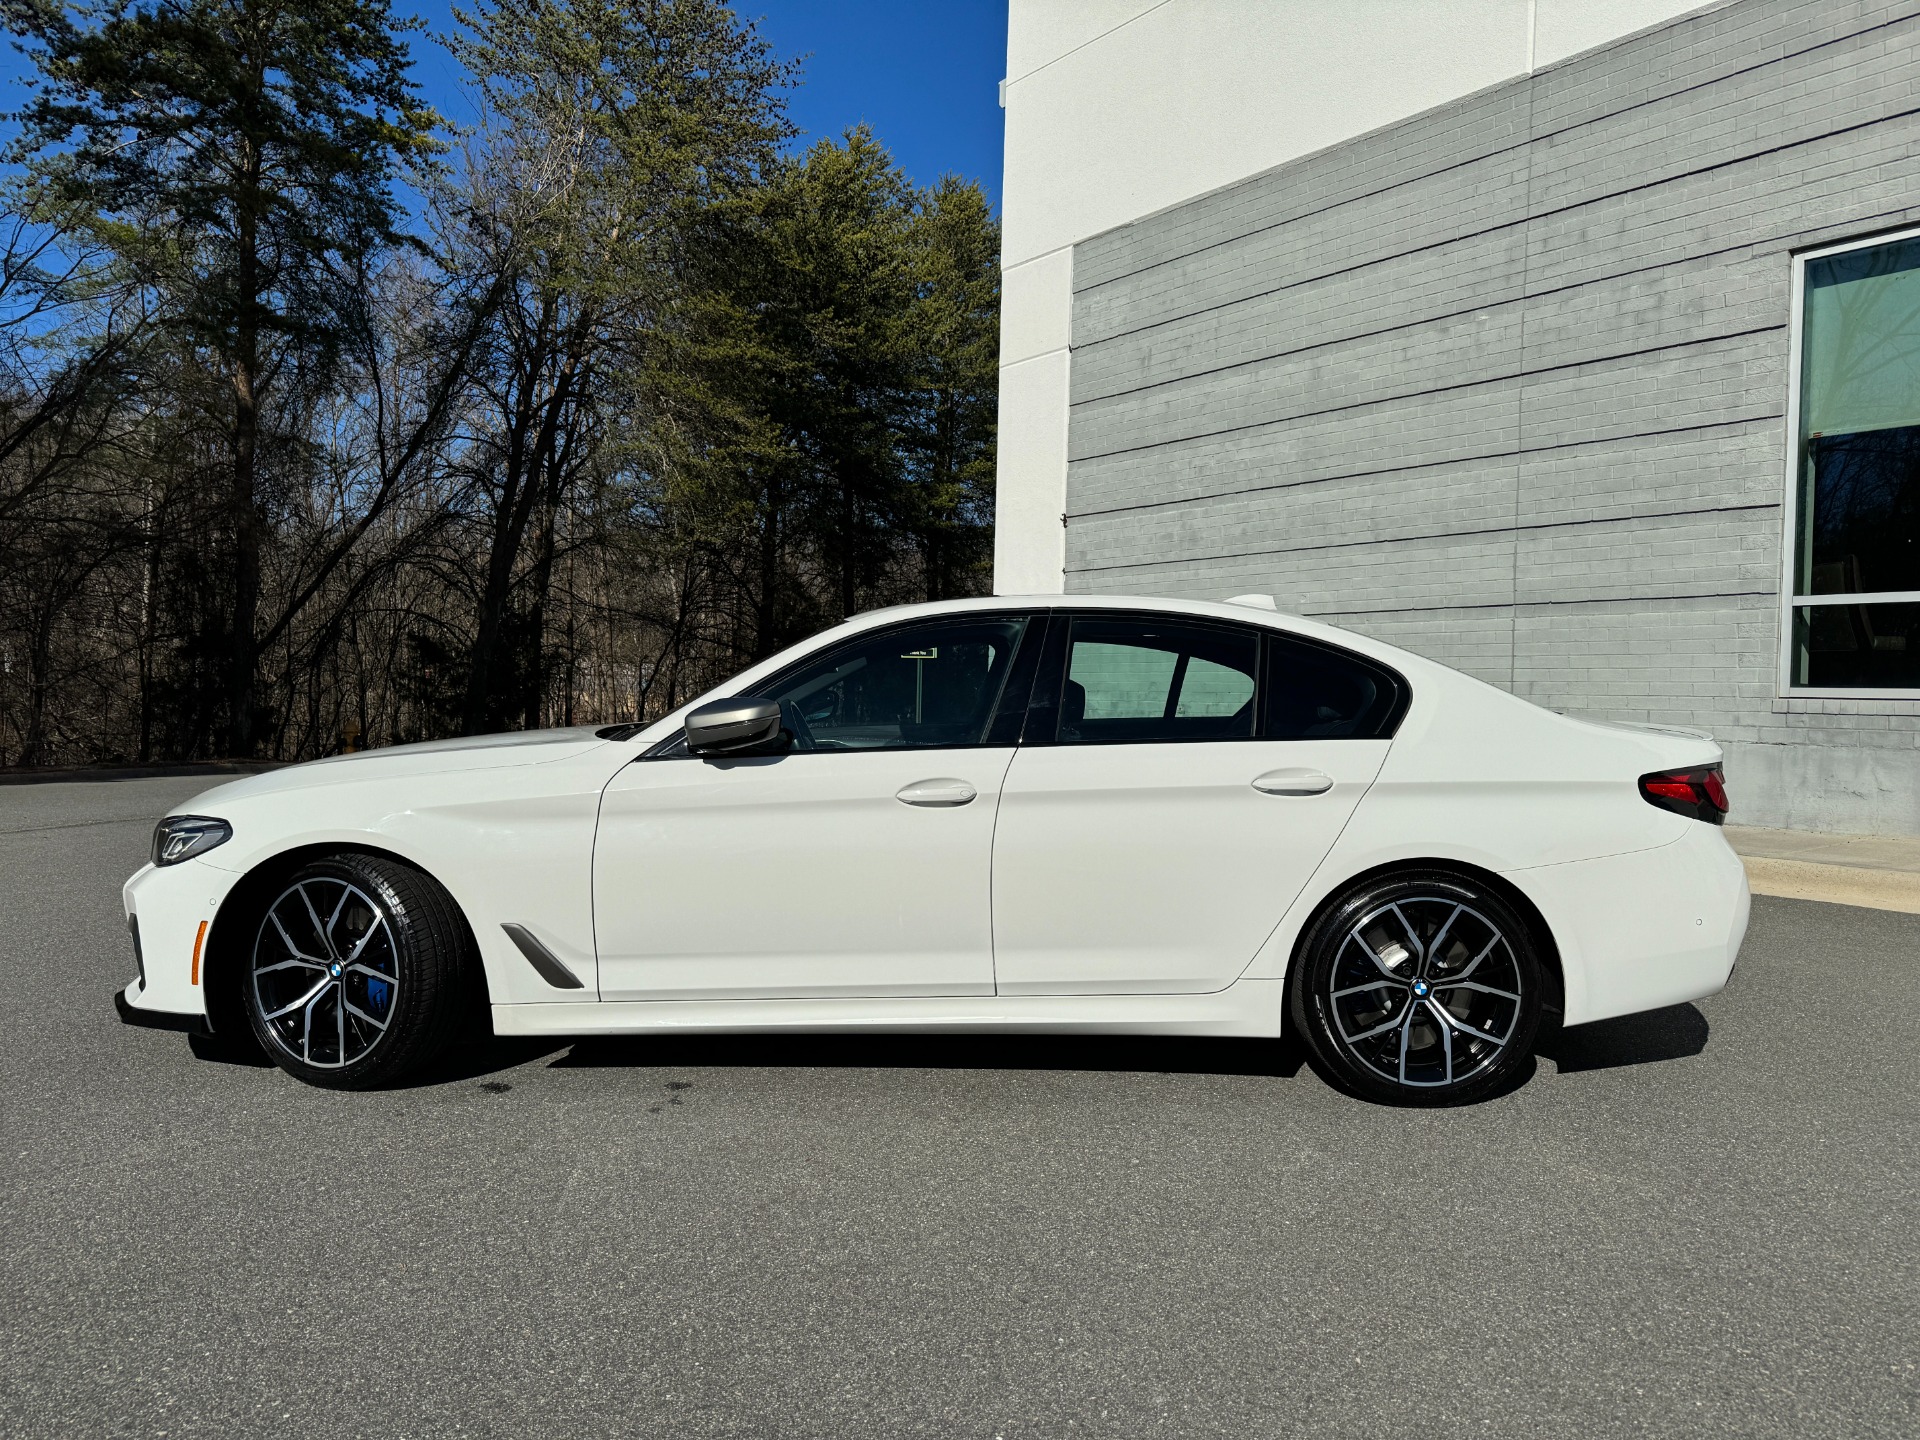 Used 2021 BMW 5 Series M550i xDrive COLD WEATHER PKG / LED LIGHTS / M SPORT WHEELS for sale $56,995 at Formula Imports in Charlotte NC 28227 2